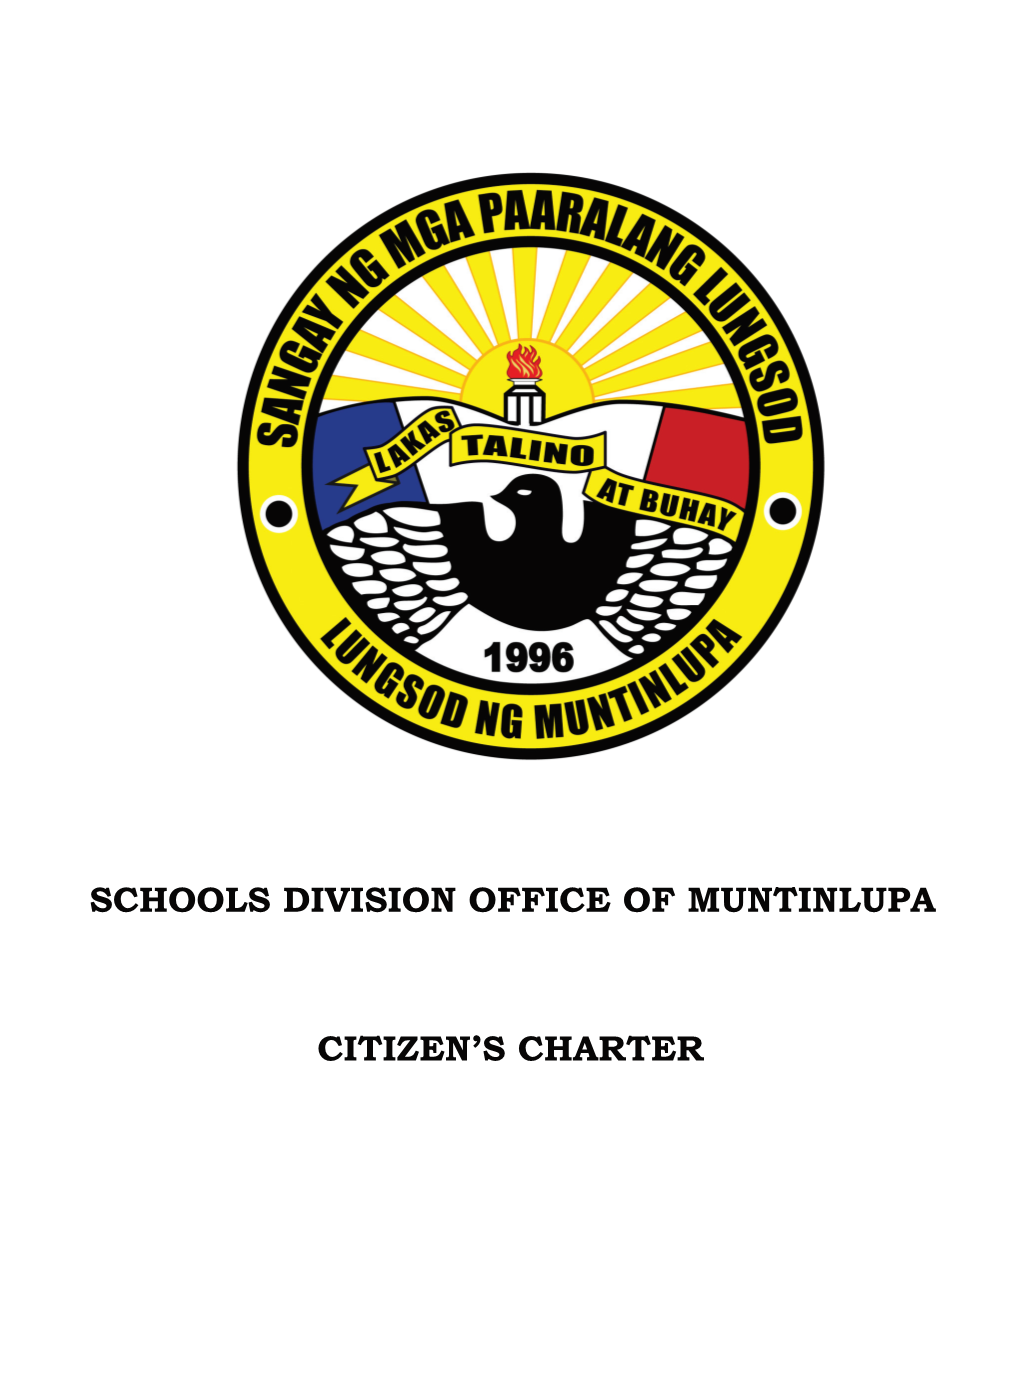 Schools Division Office of Muntinlupa Citizen's Charter